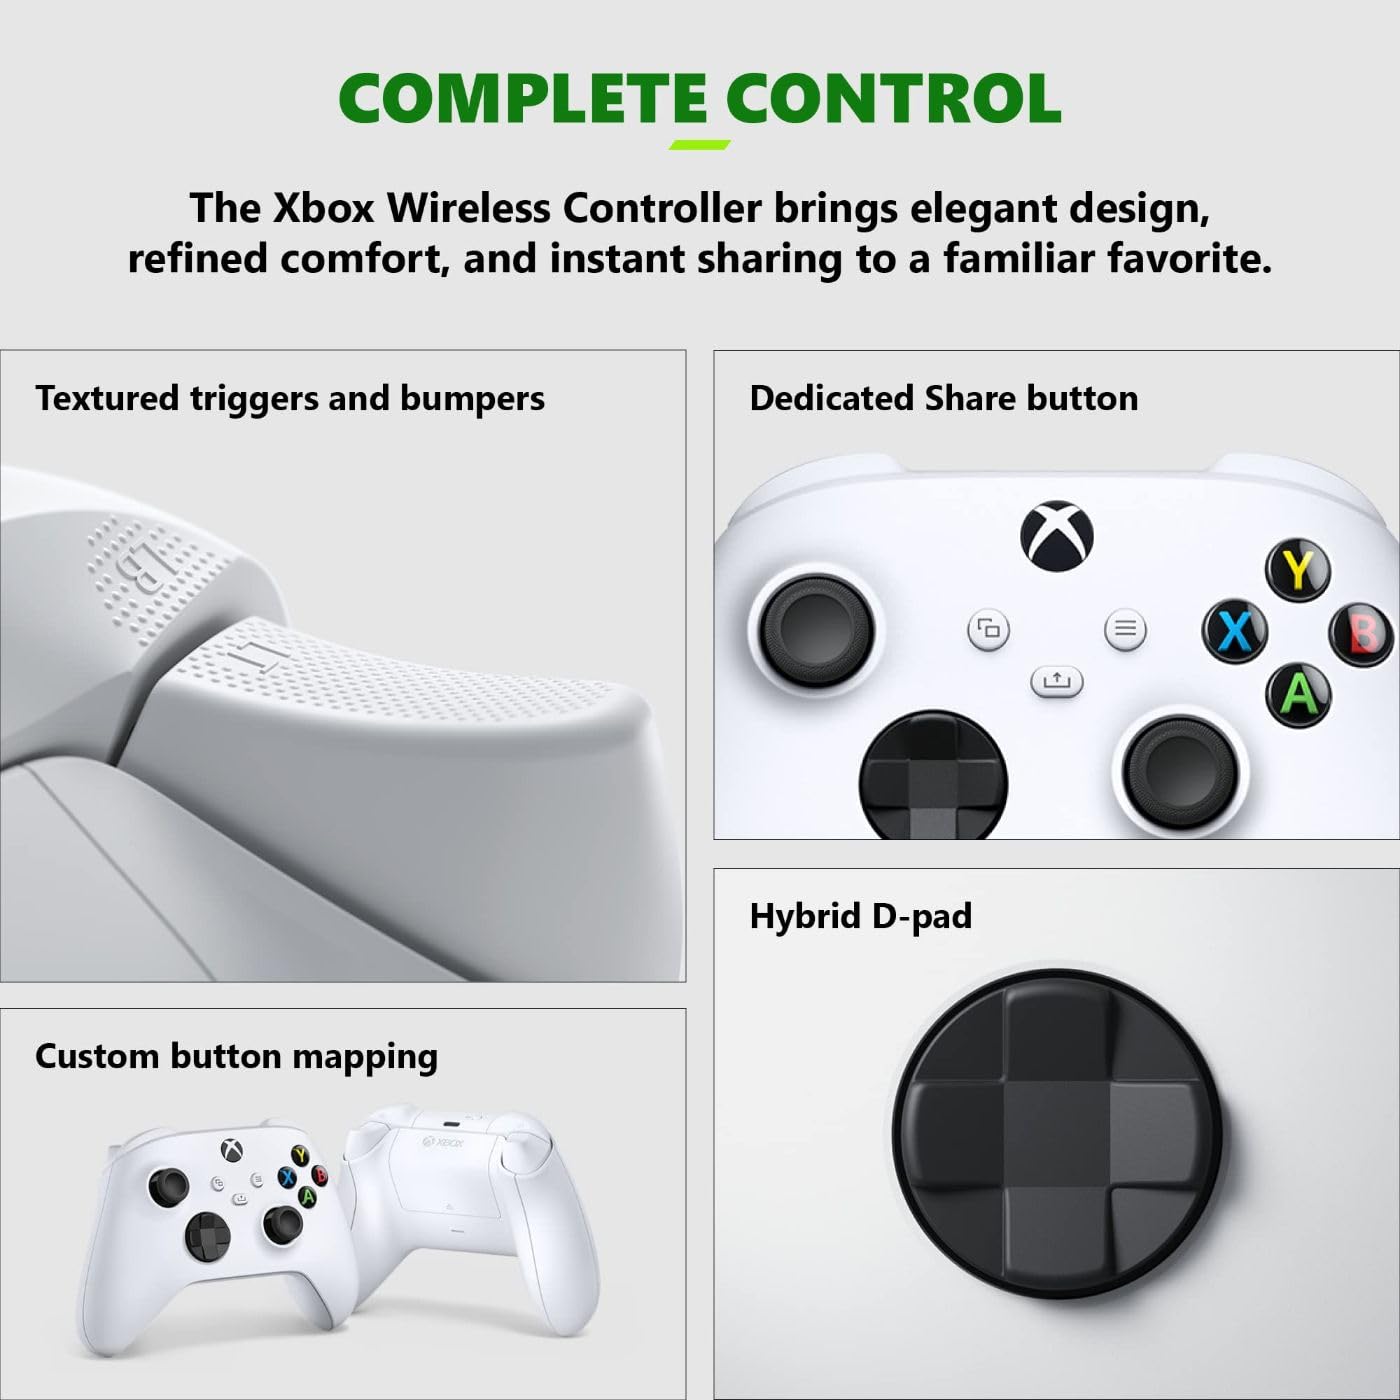 Microsoft Xbox Series S 512GB SSD Console - Includes Xbox Wireless Controller - Up to 120 frames per second - 10GB RAM 512GB SSD - Experience high dynamic range - Xbox Velocity Architecture